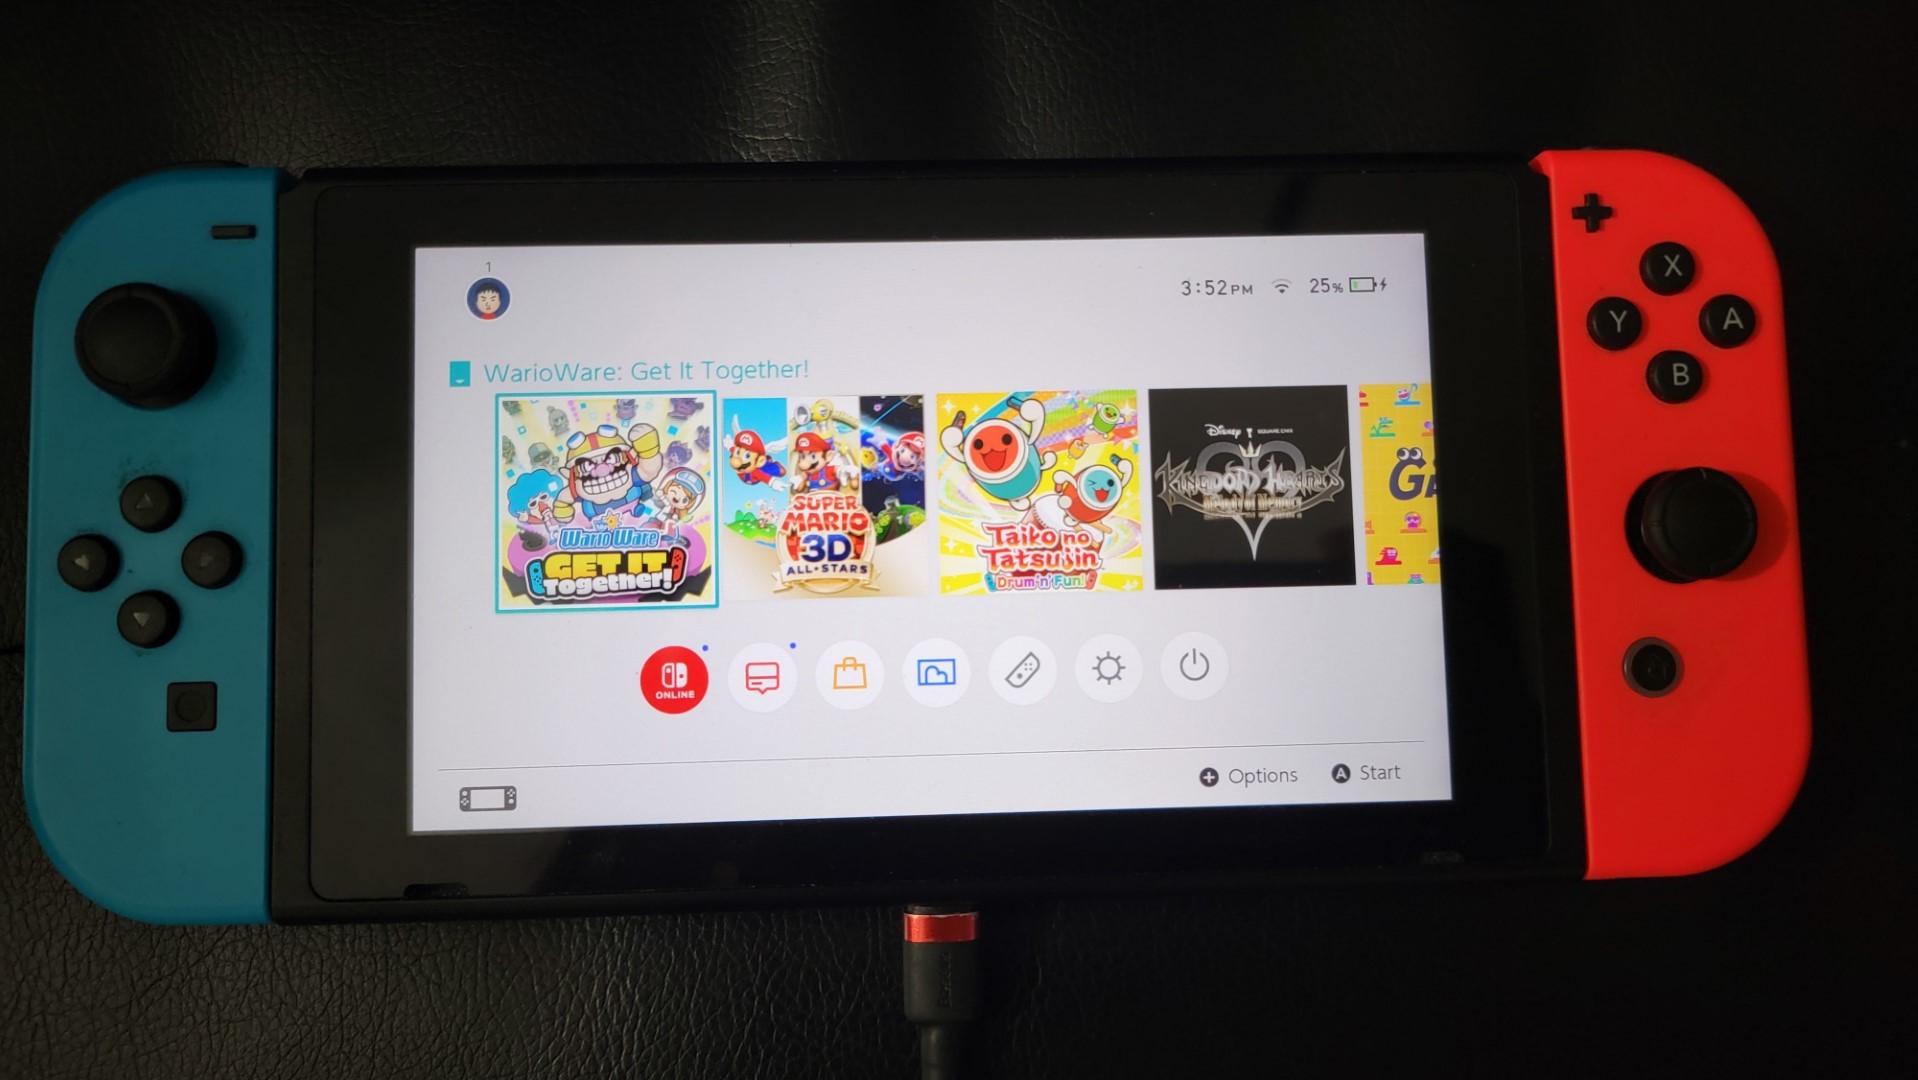 WarioWare: Get It Together game on the Nintendo Switch Main Menu